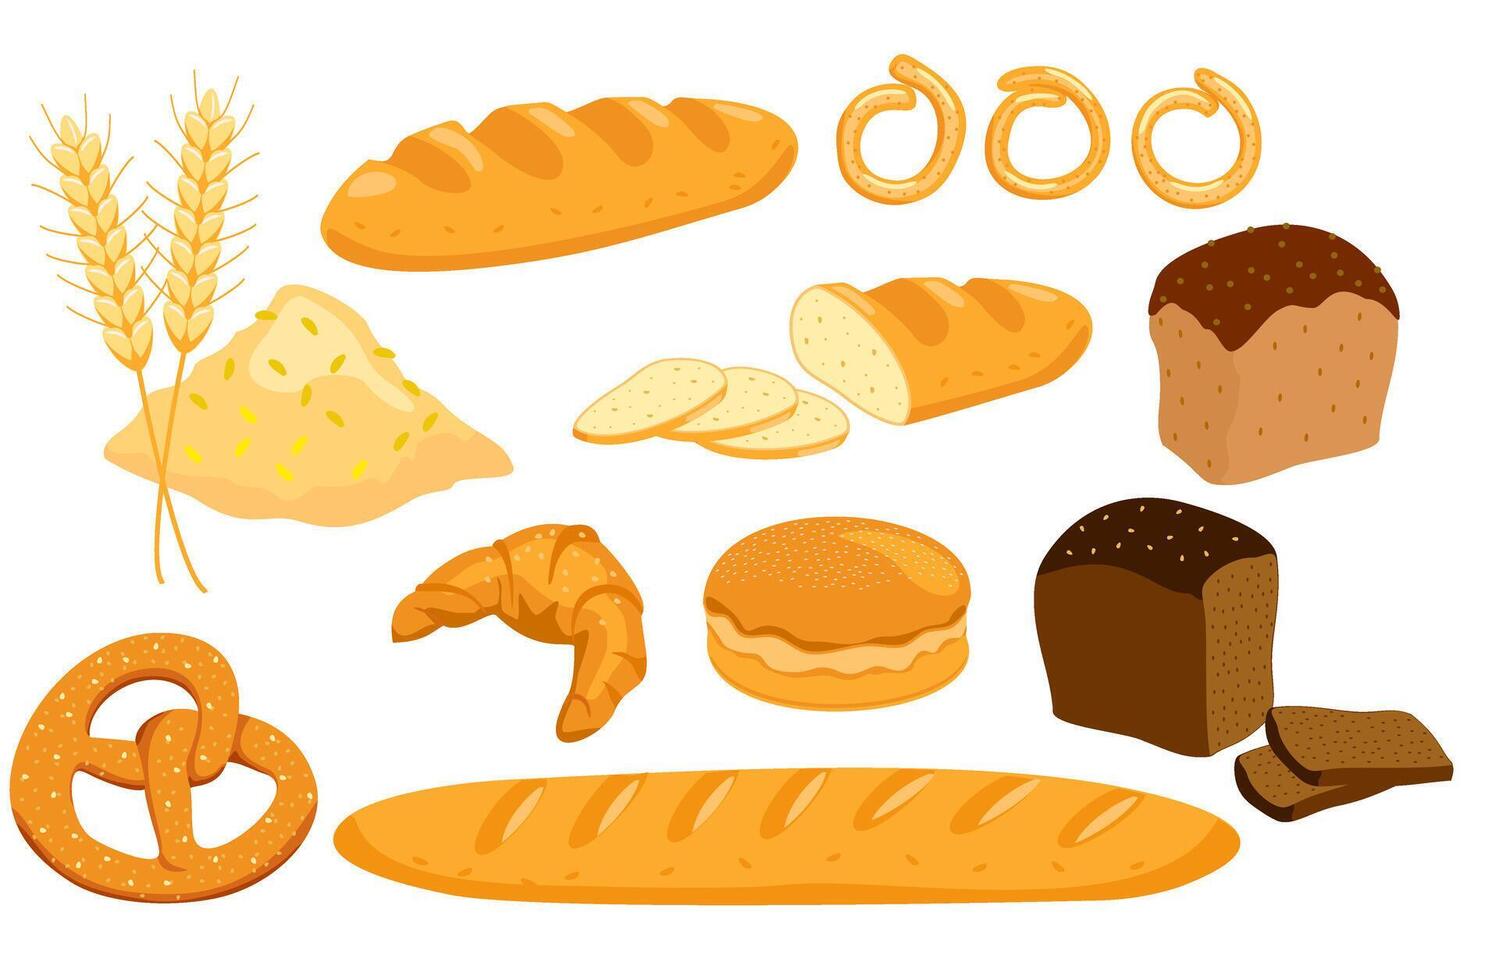 bread icons set. Rye, whole grain and wheat bread. bakery pastry products. For design menu bakery vector